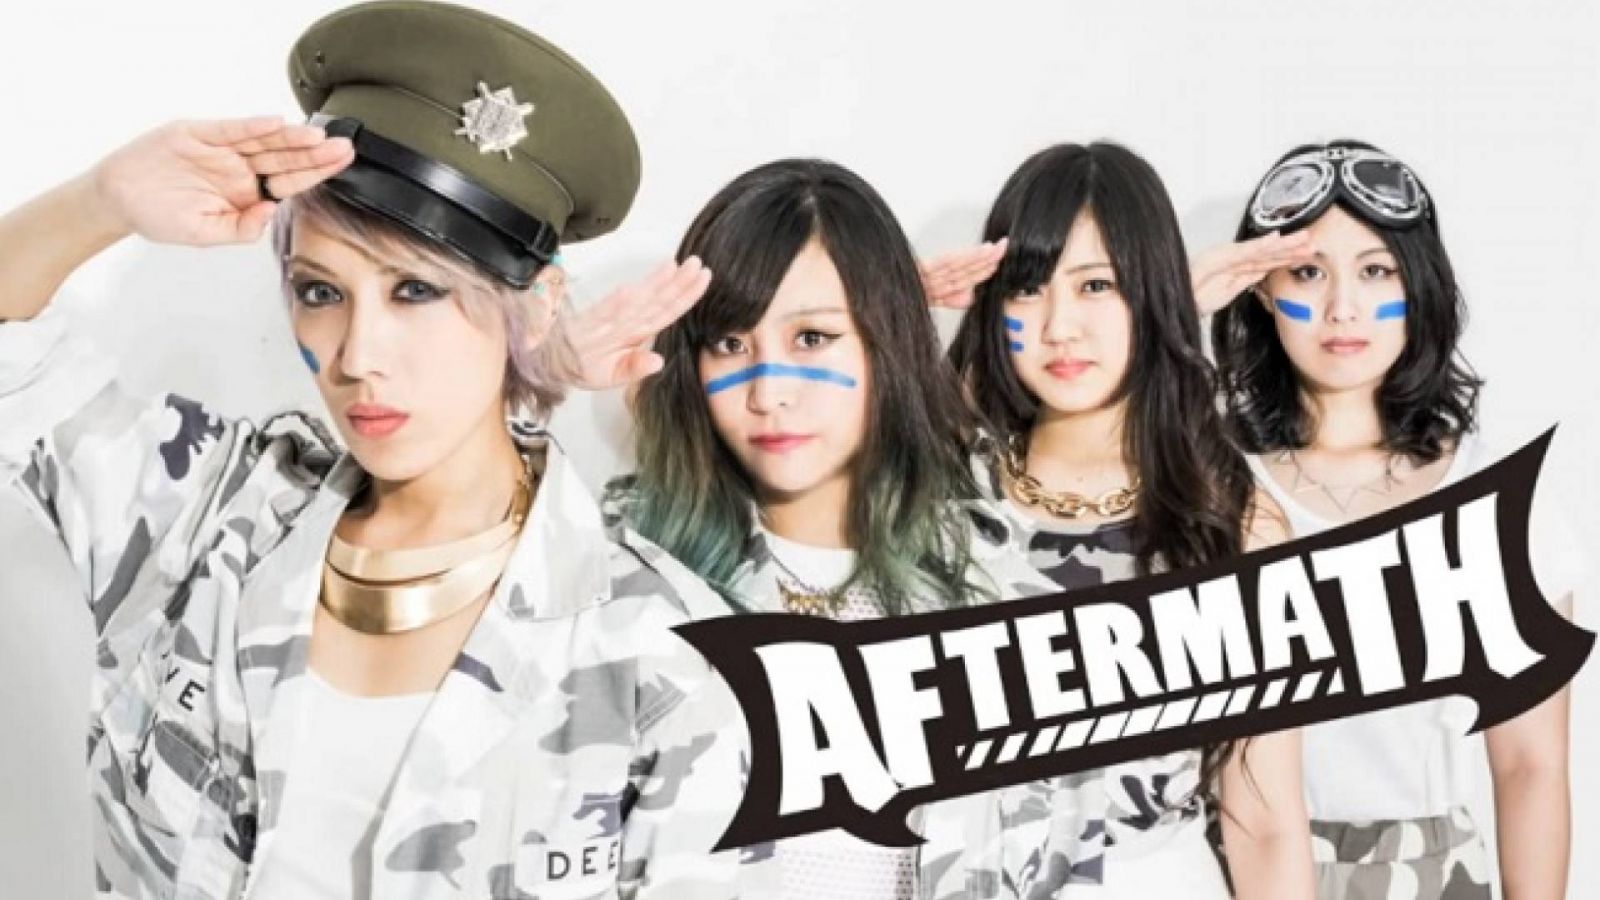 Minialbum AFTERMATH © AFTERMATH. All rights reserved.